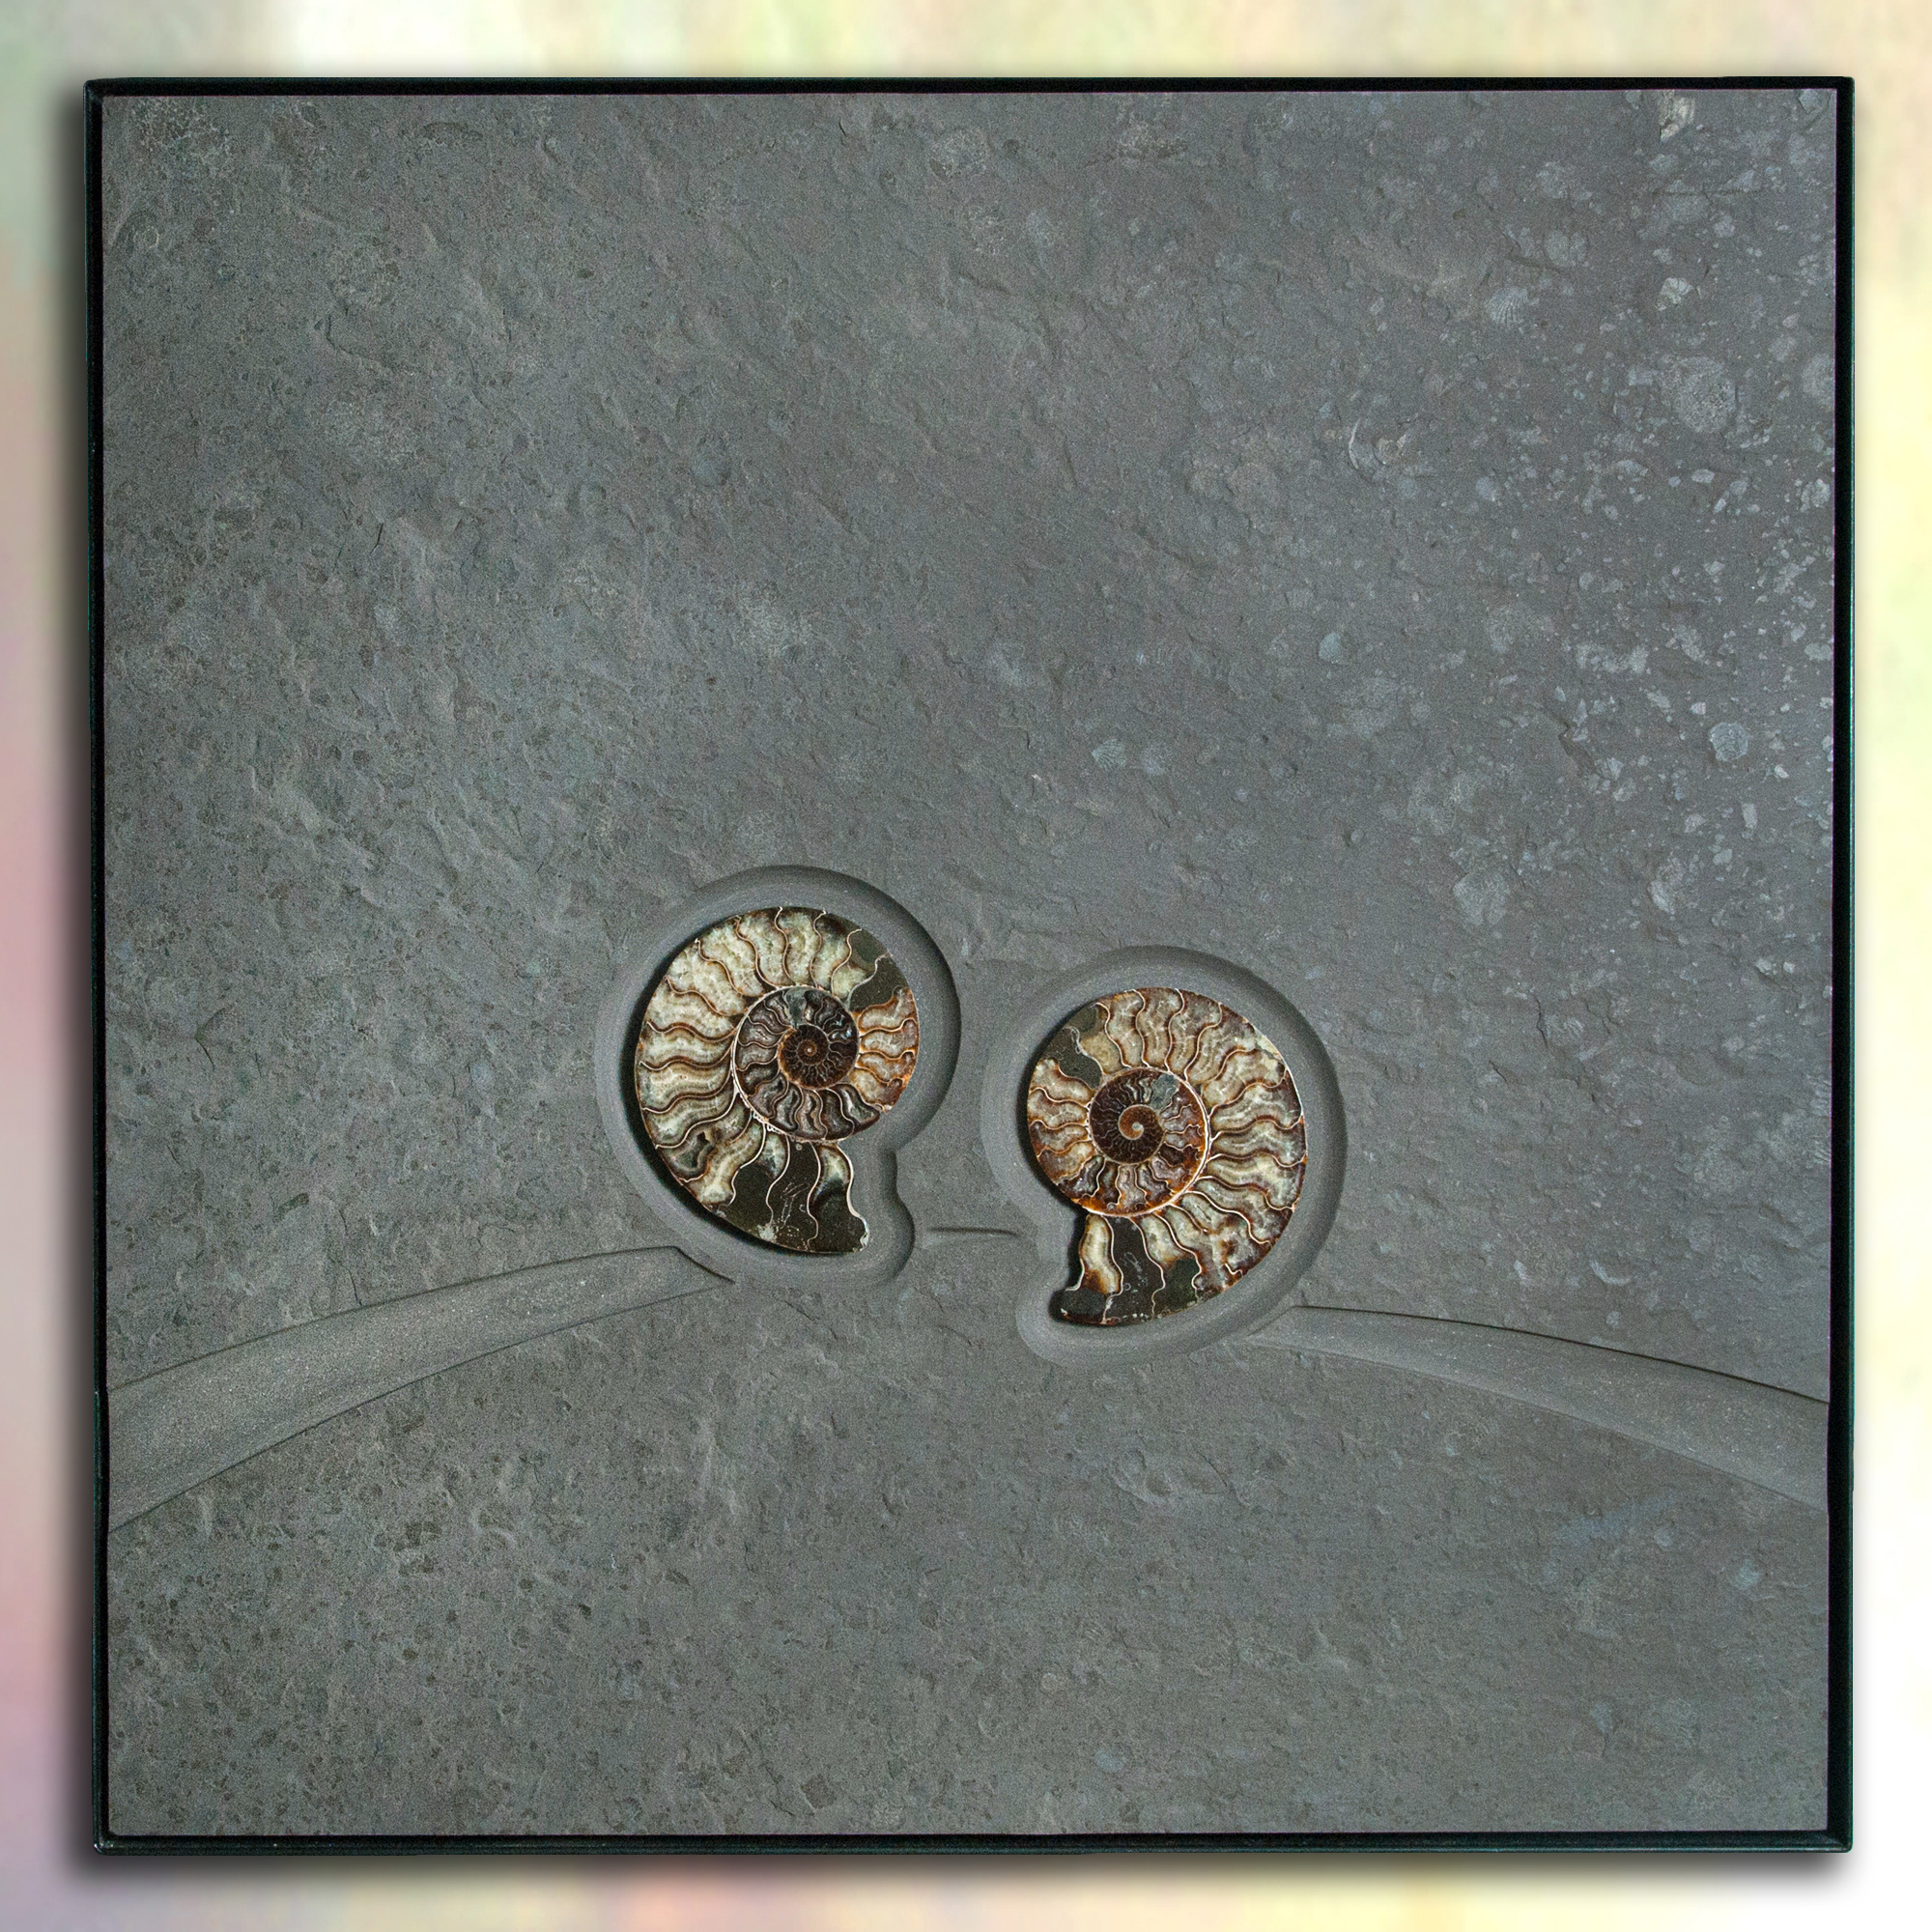 Come Together II - Wall art with fossils